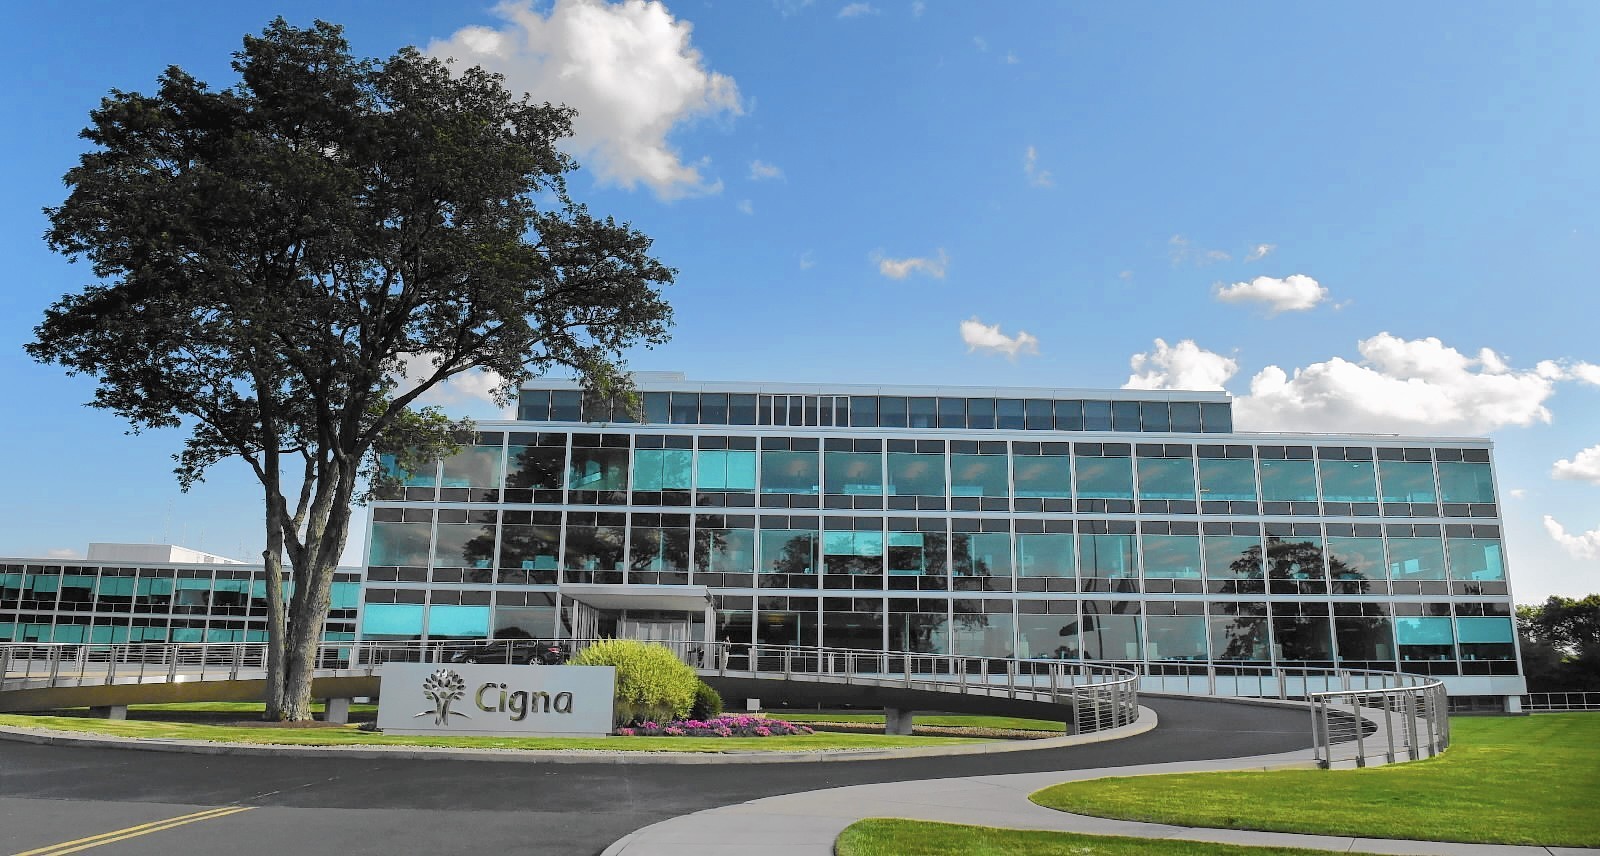 Cigna Corporate Office and Headquarters address information